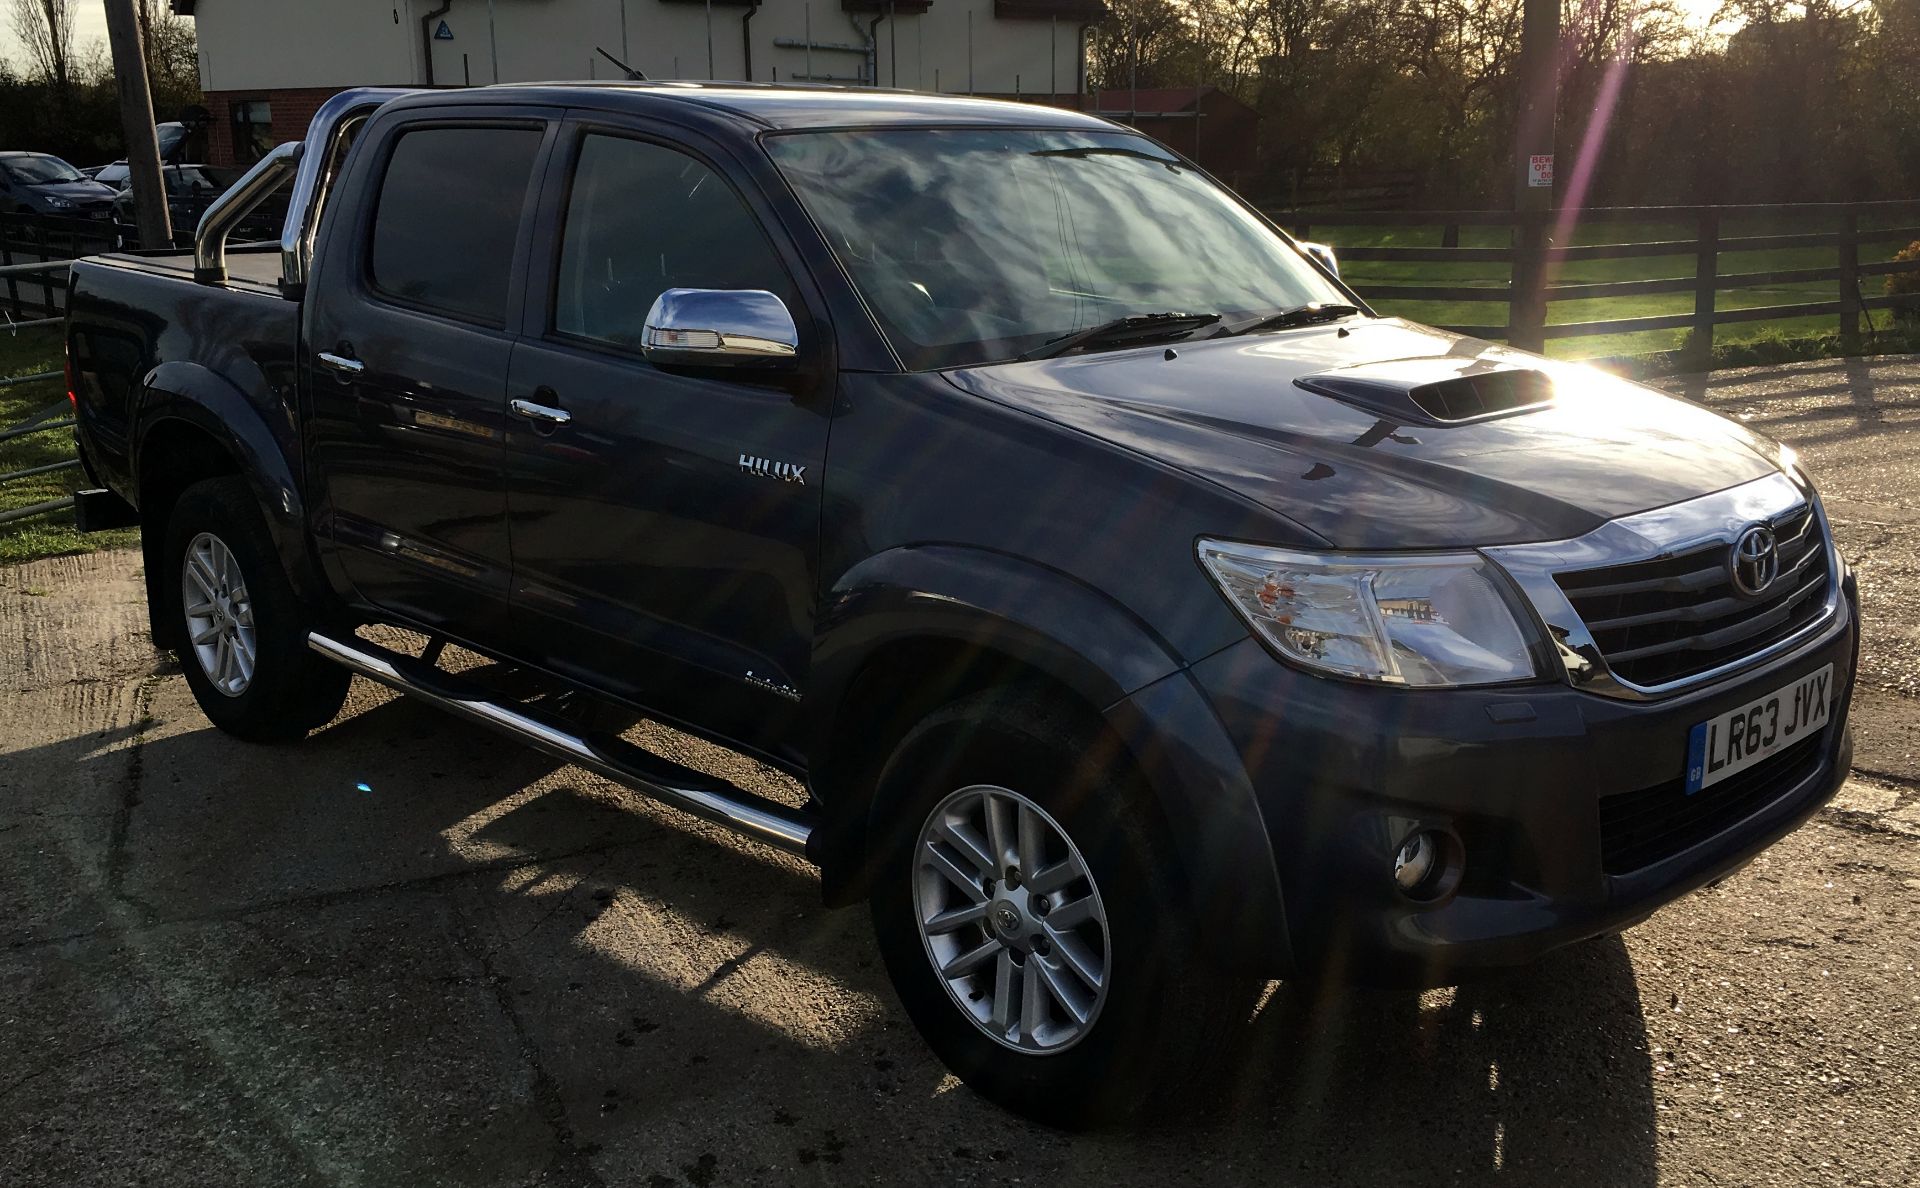 Toyota Hilux Invincible Double Cab D-4D 4WD 171 Auto, LR63 JVX, First Registered 10th October - Image 2 of 10